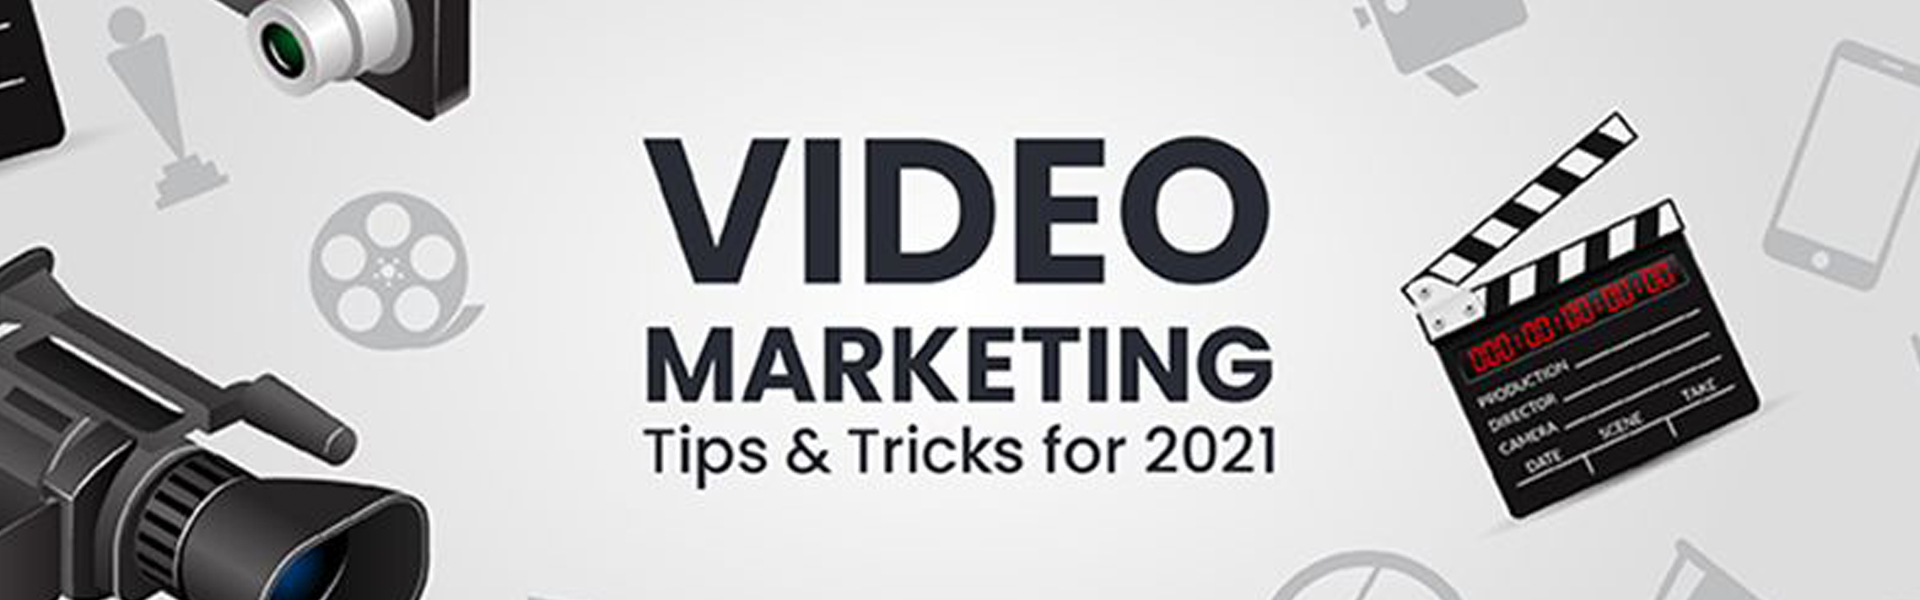 video marketing tips and tricks